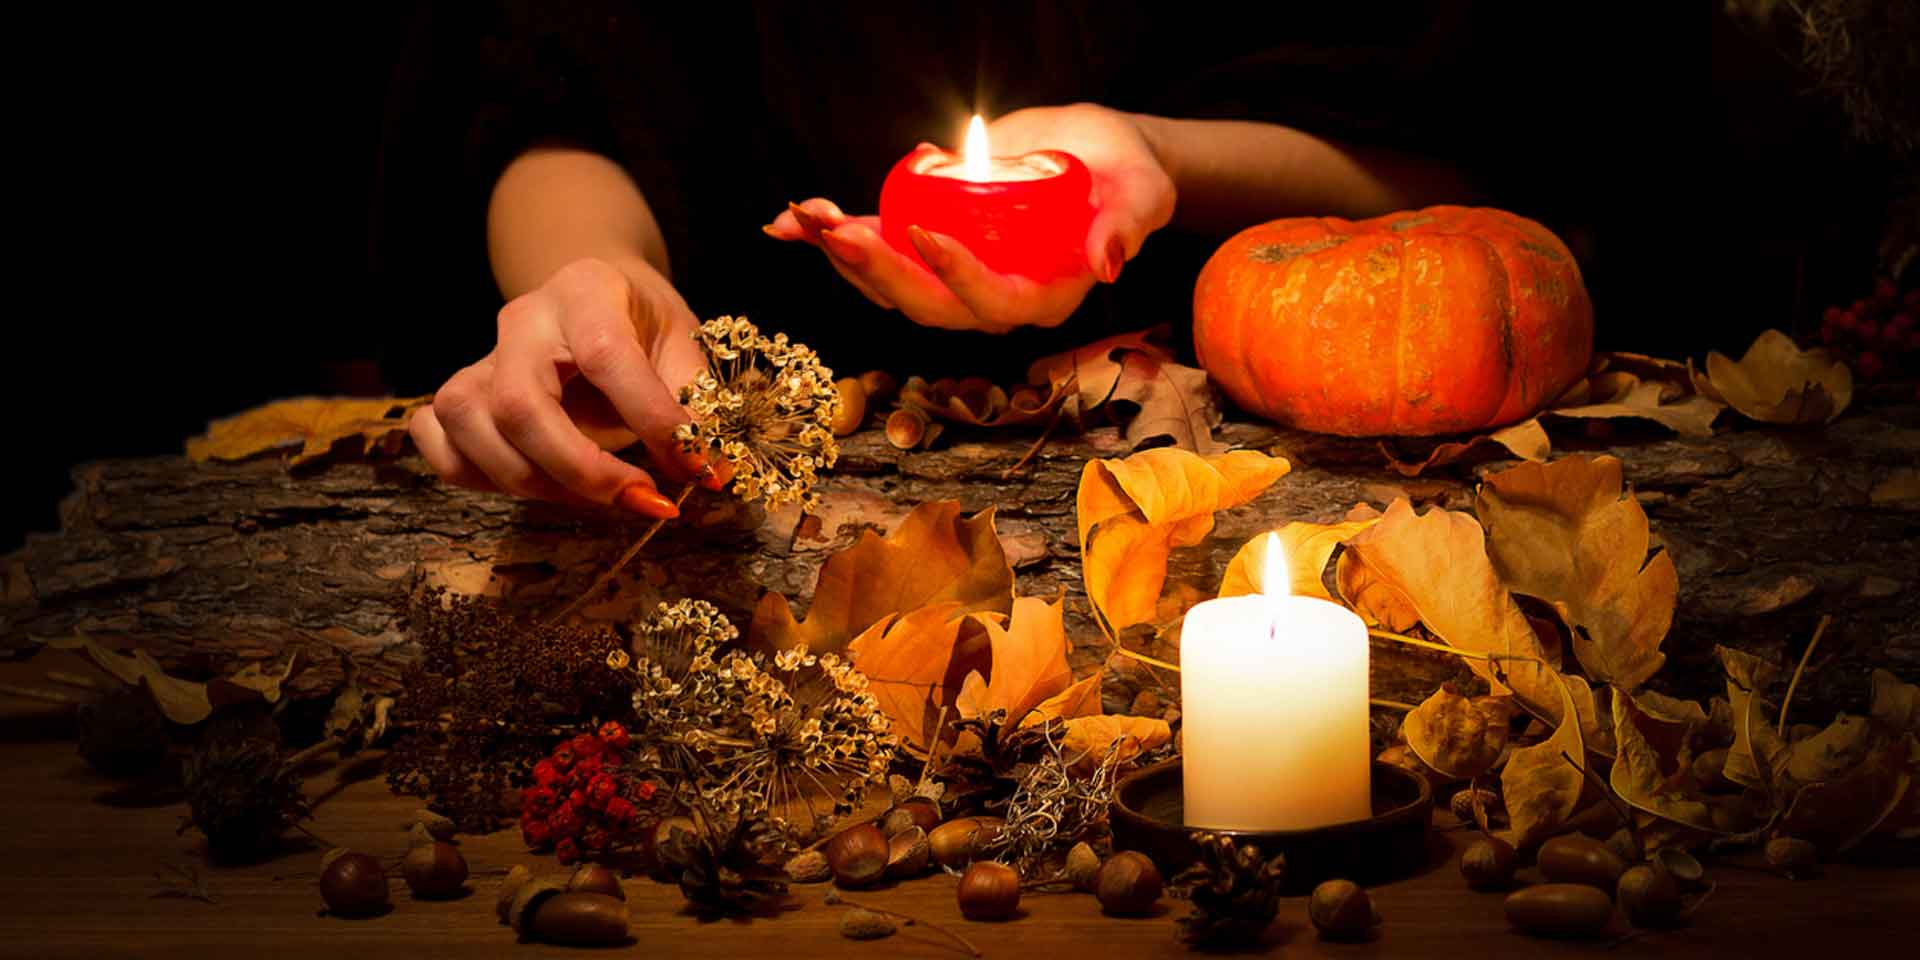 A person arranges witchy elements like dried flowers, leaves, and acorns on a wooden surface, illuminated by the warm glow of candles, with a small pumpkin adding to the seasonal atmosphere.